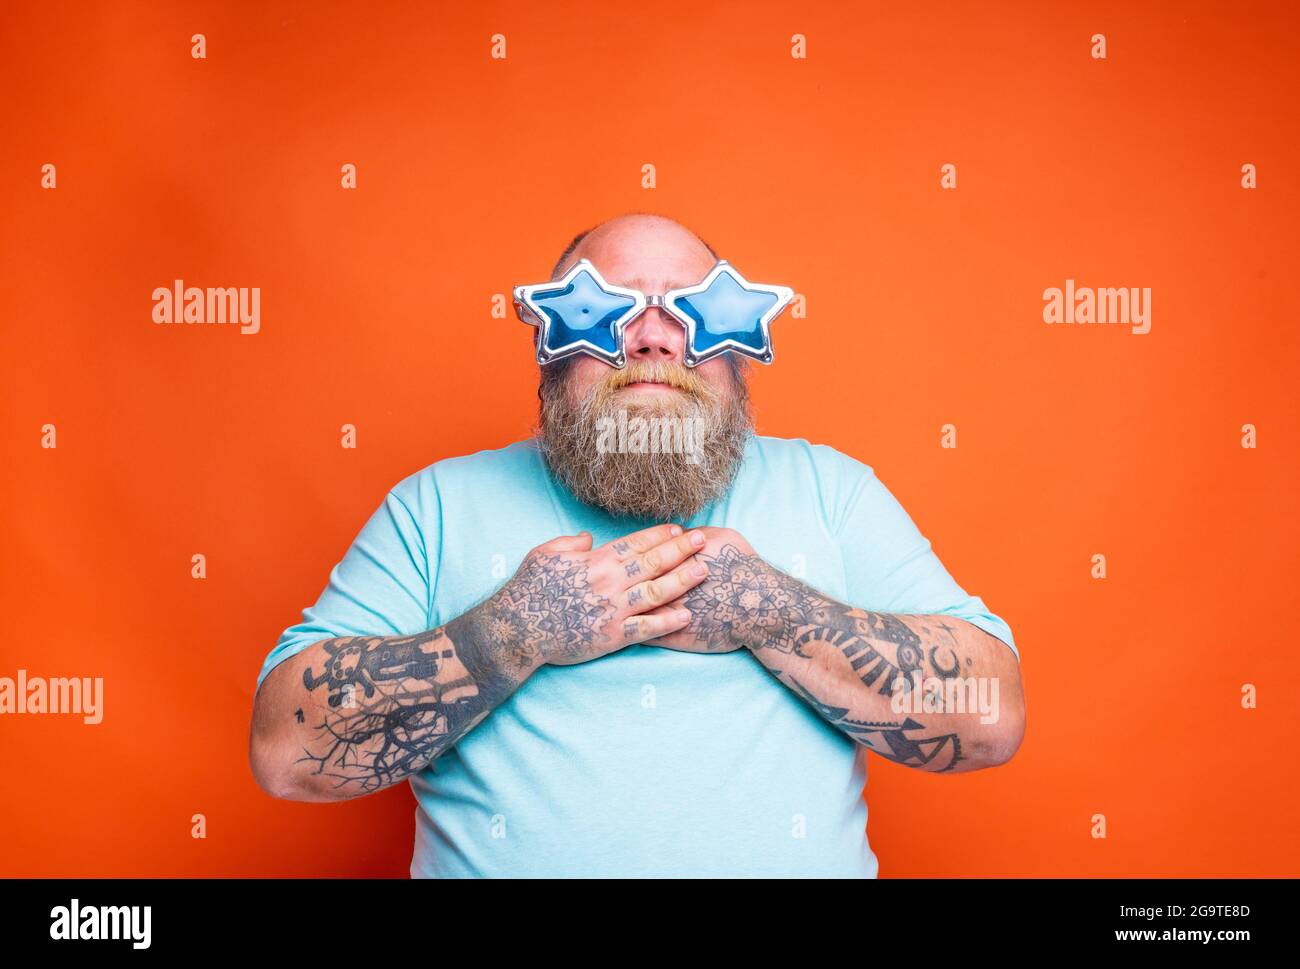 Fat amazed man with beard, tattoos and sunglasses is surprised for something Stock Photo